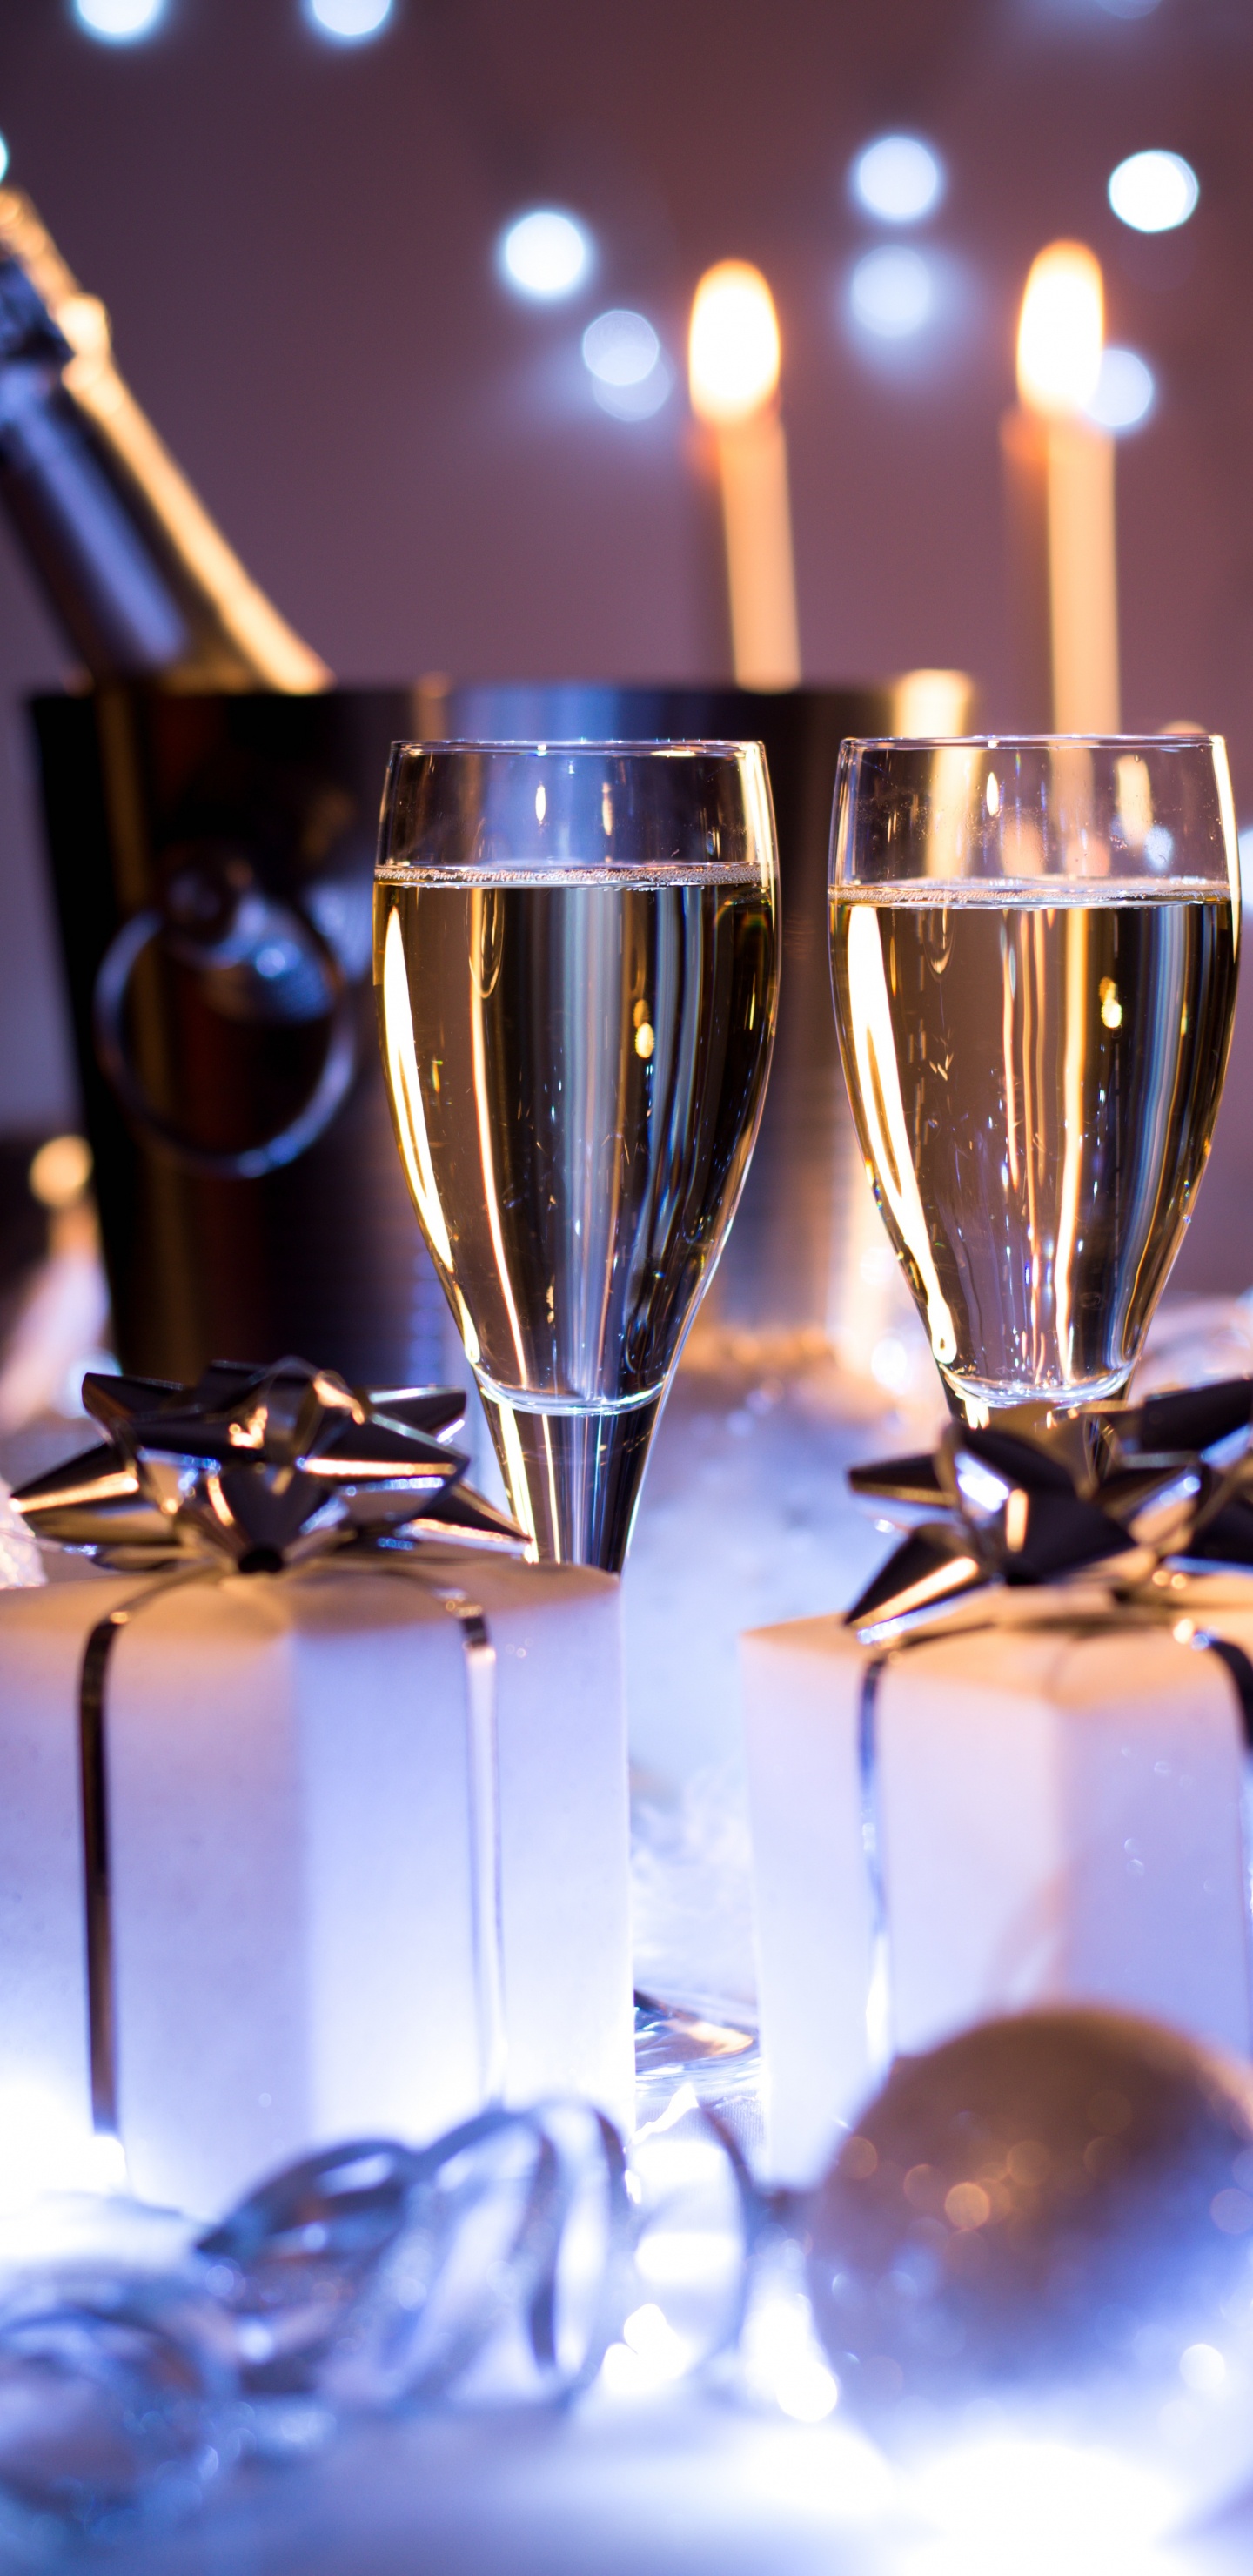 Champagne, Wine, New Years Eve, New Year, Still Life. Wallpaper in 1440x2960 Resolution